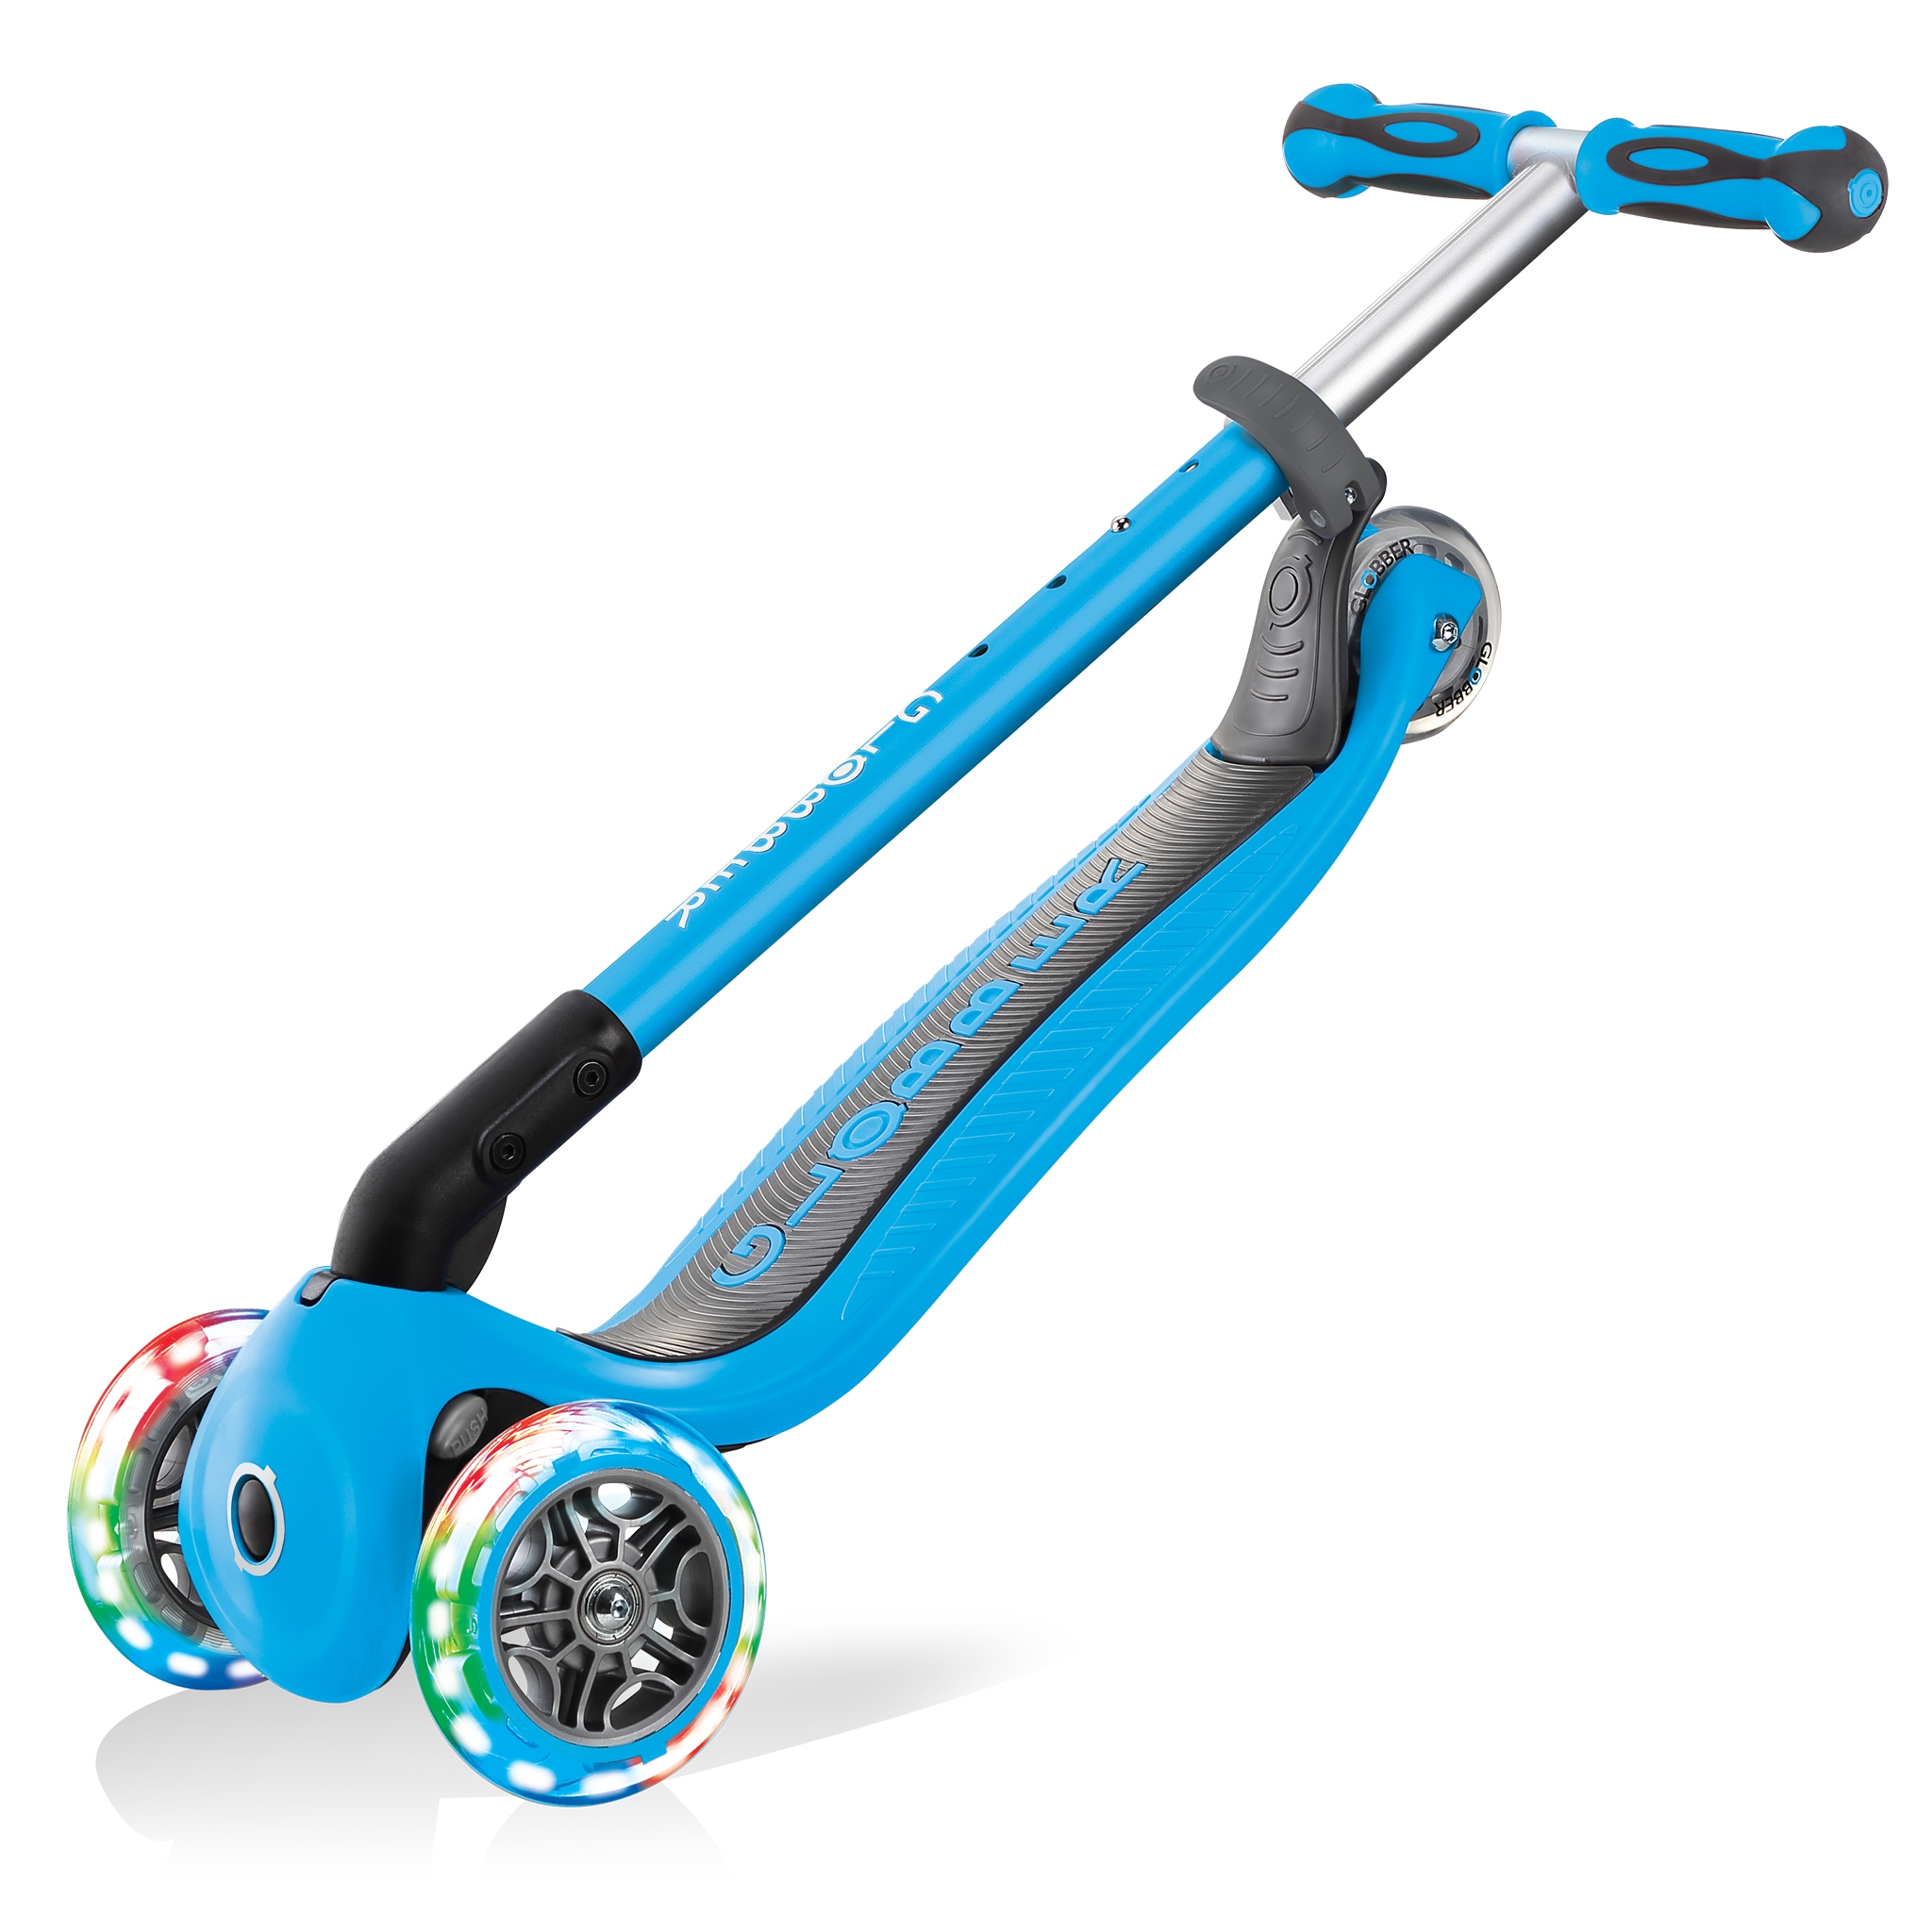 GO-UP-DELUXE-LIGHTS-ride-on-walking-bike-scooter-with-light-up-wheels-trolley-mode-compatible-sky-blue 5